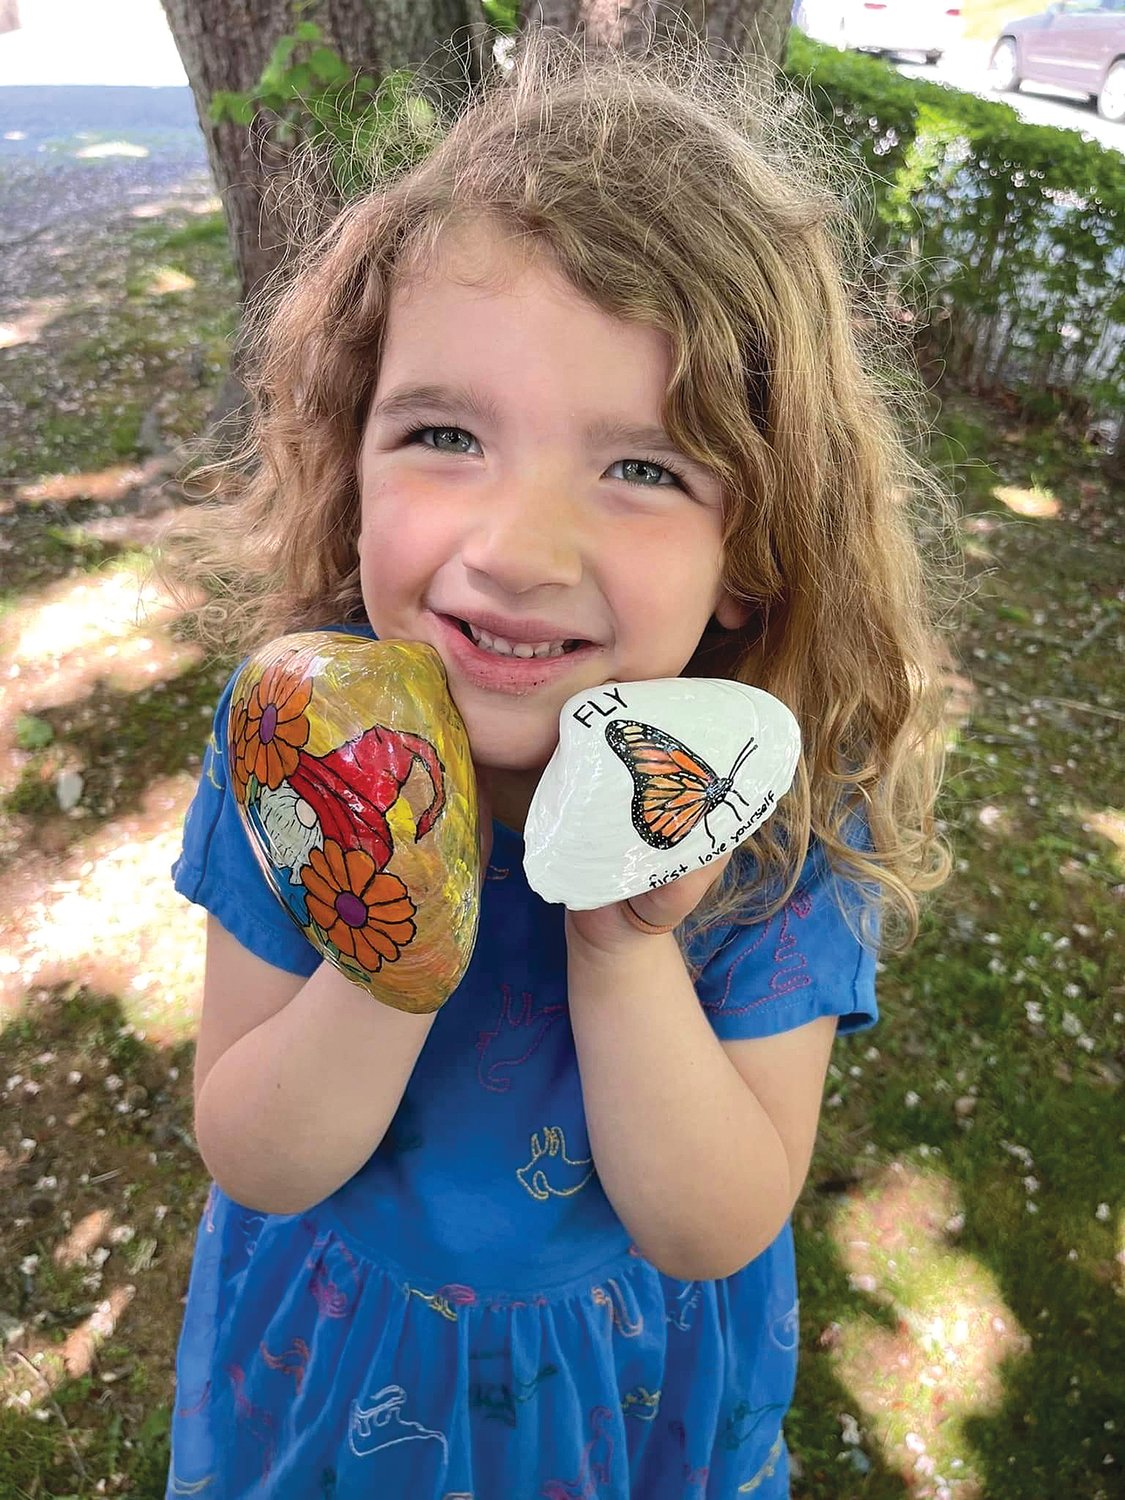 Addie Loveland shows off two of the painted shells. People taking part in the project both find and paint shells, often posting them to a group Facebook page.